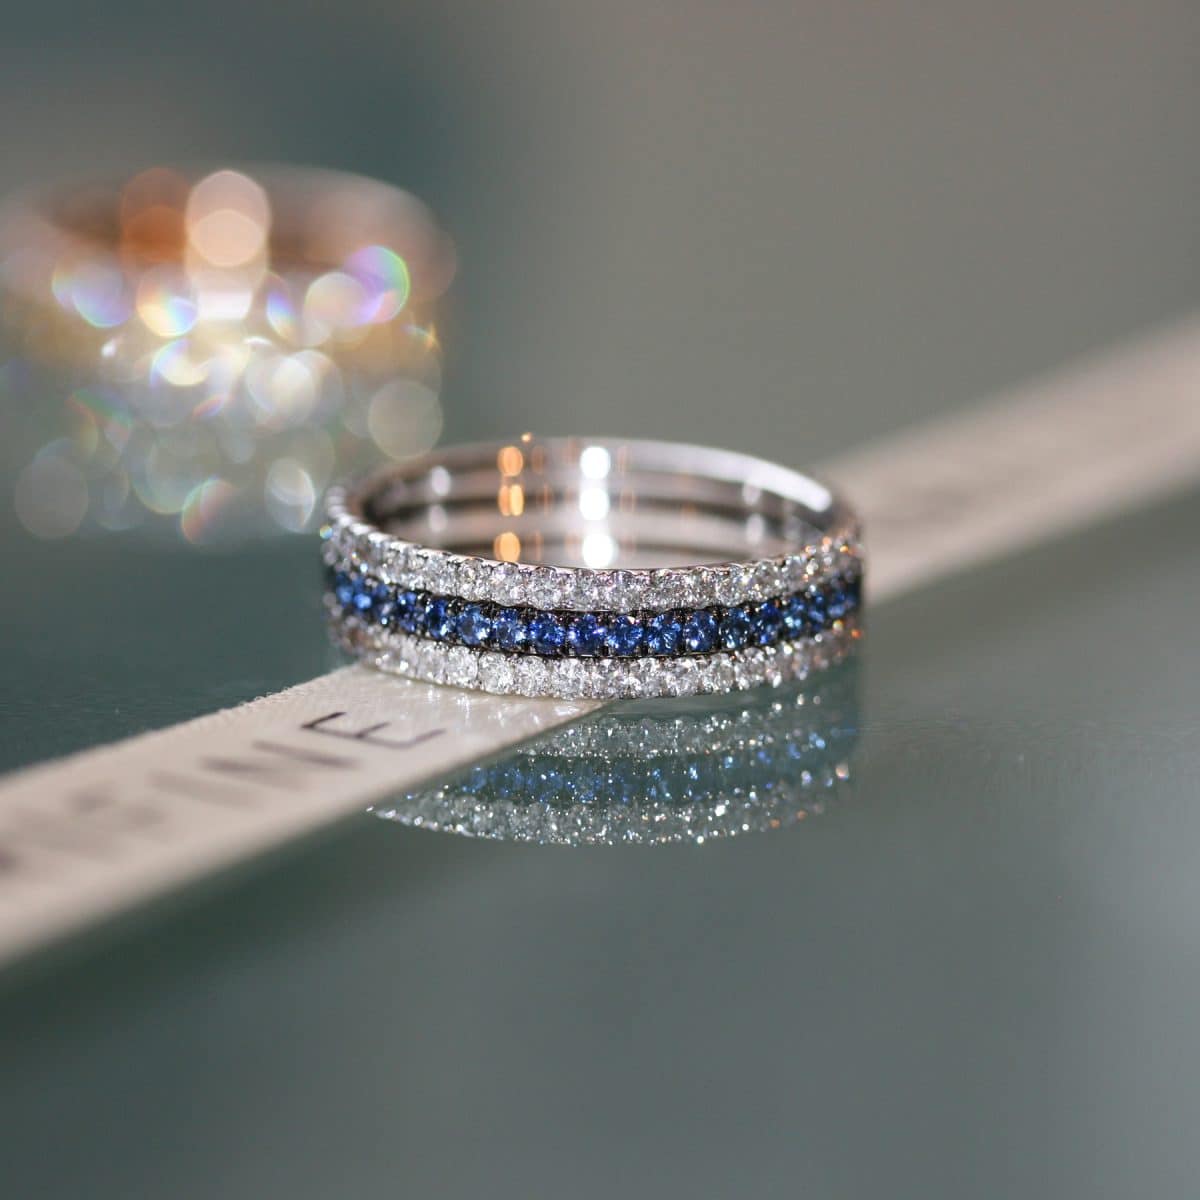 Royal Blue eternity ring stack 18ct white gold